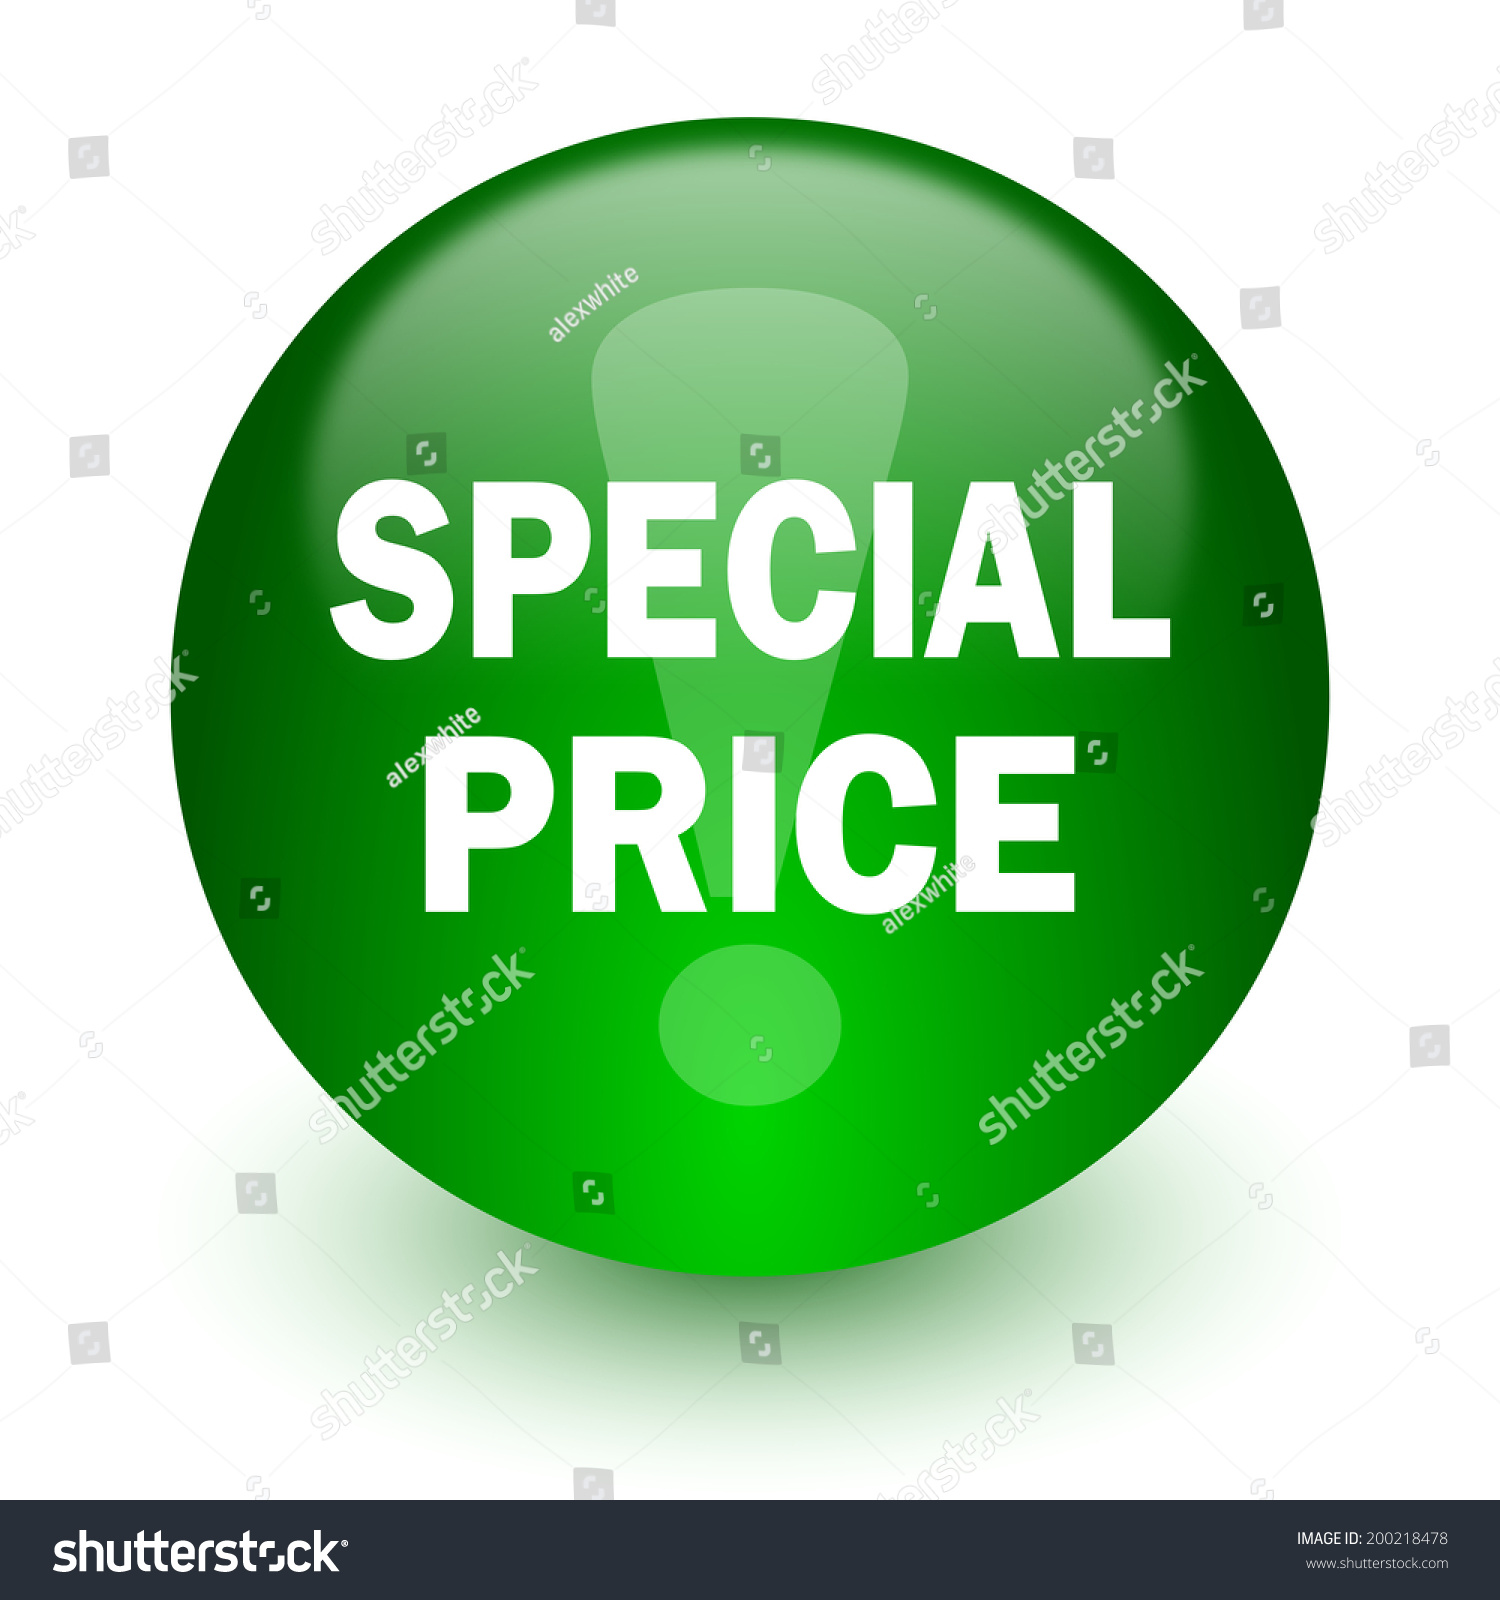 Special price icon stock illustration - Search Vector Clipart 